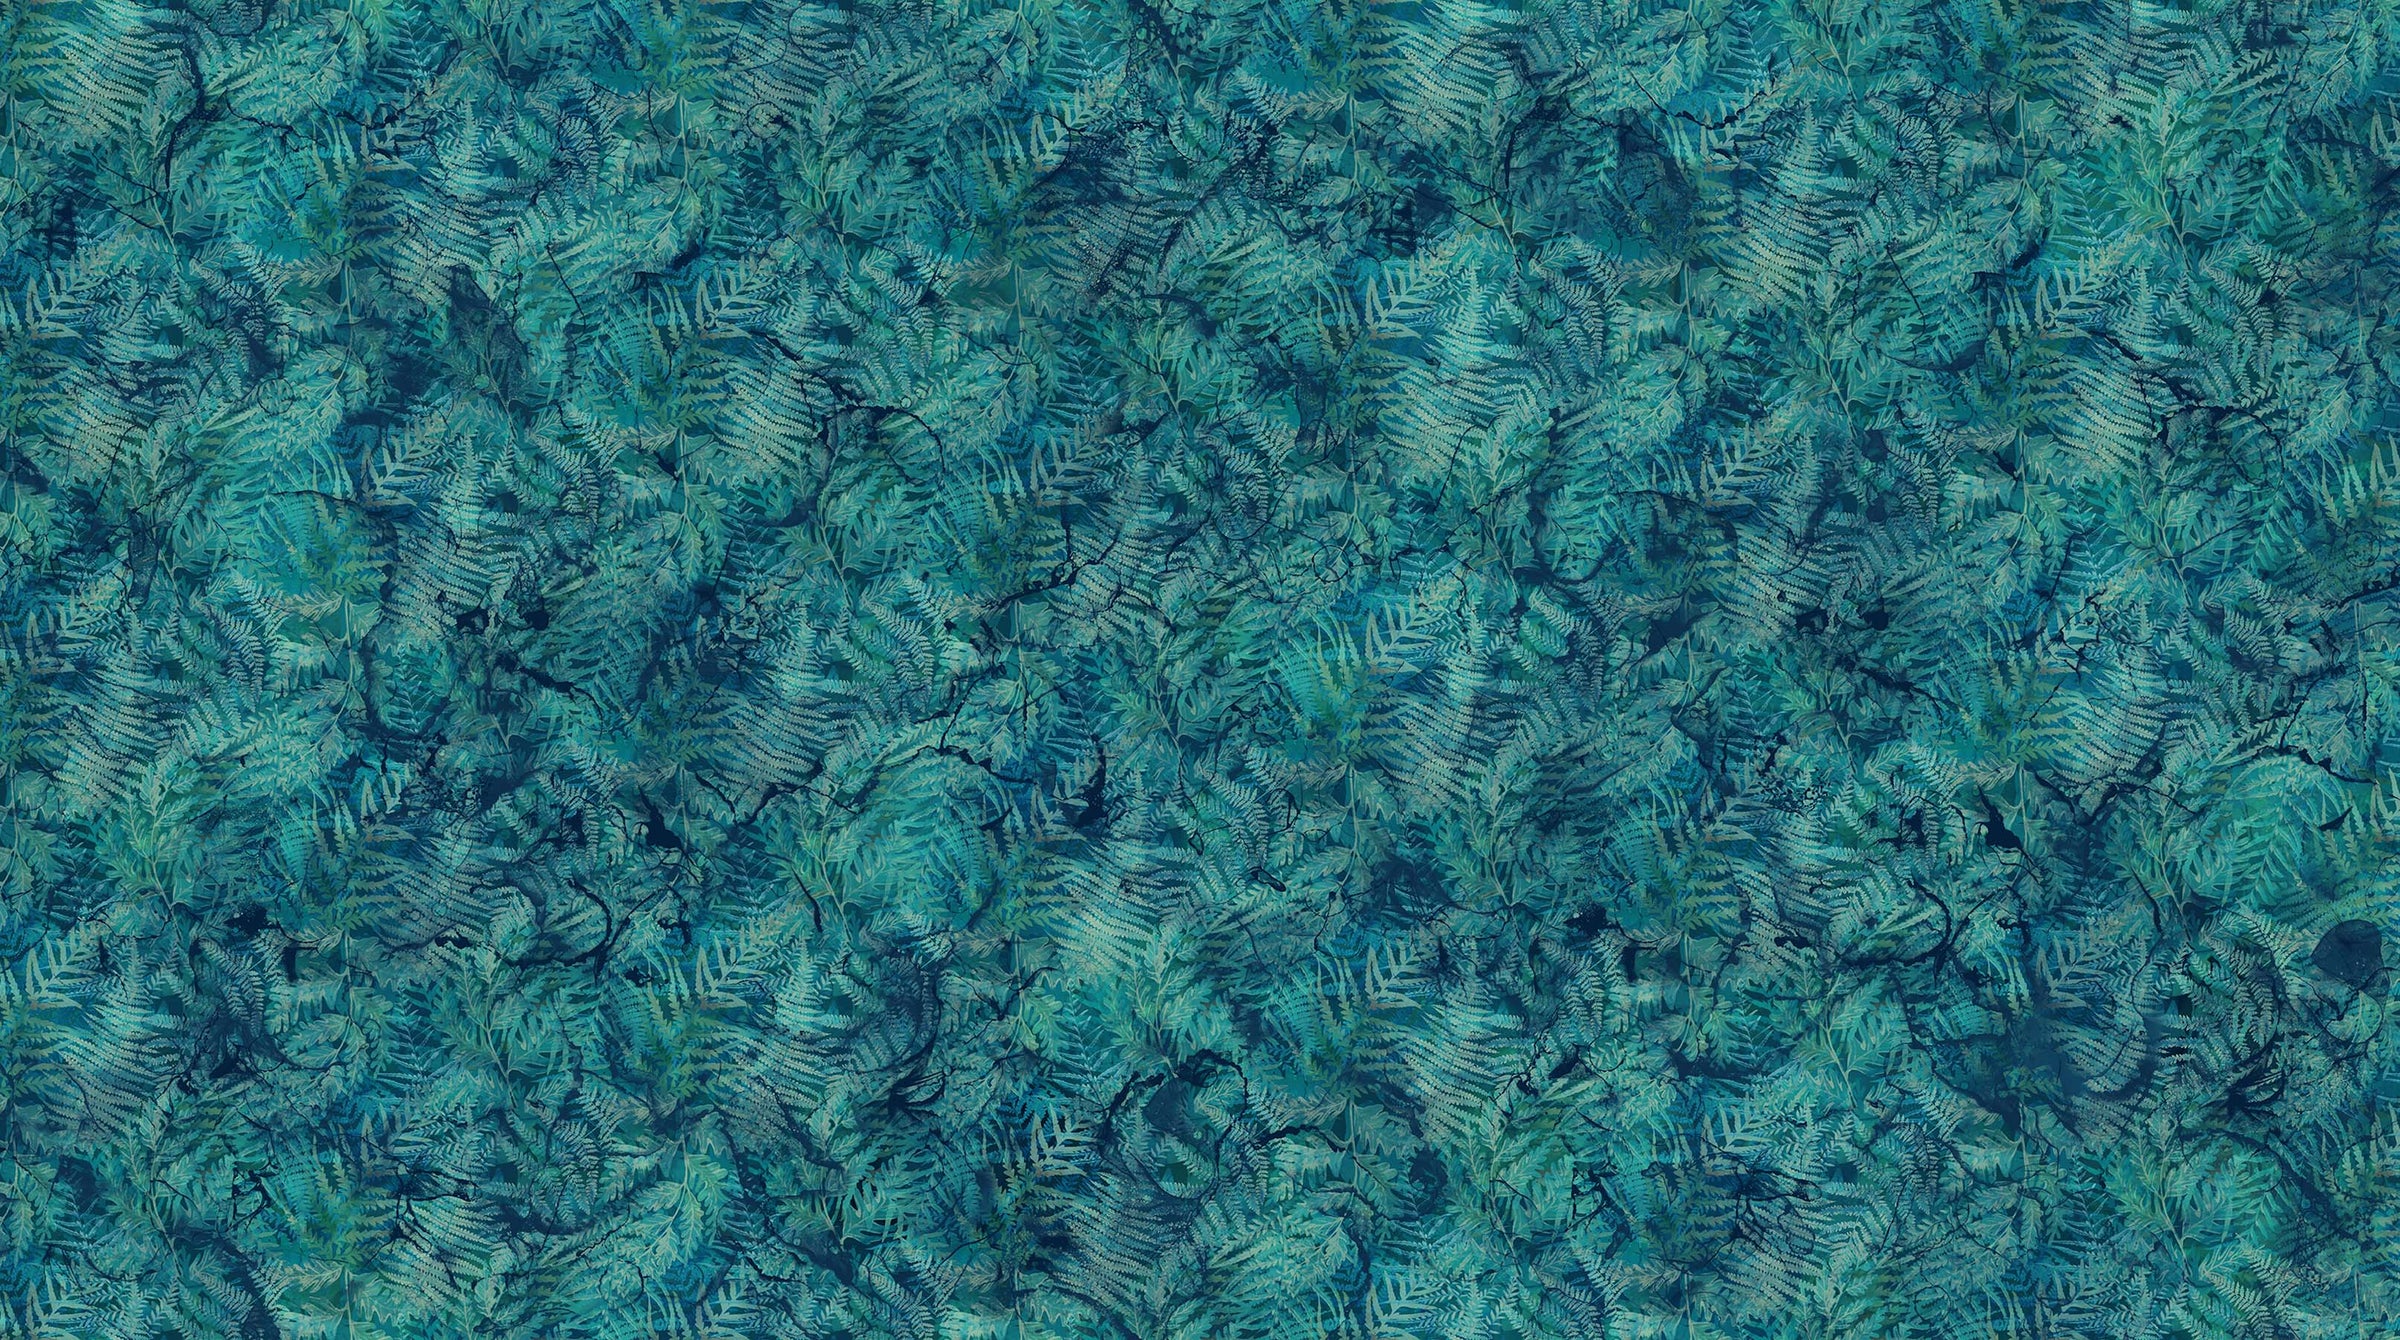 Northern Peaks Quilt Fabric - Ferns in Prussian Blue - DP25171-46